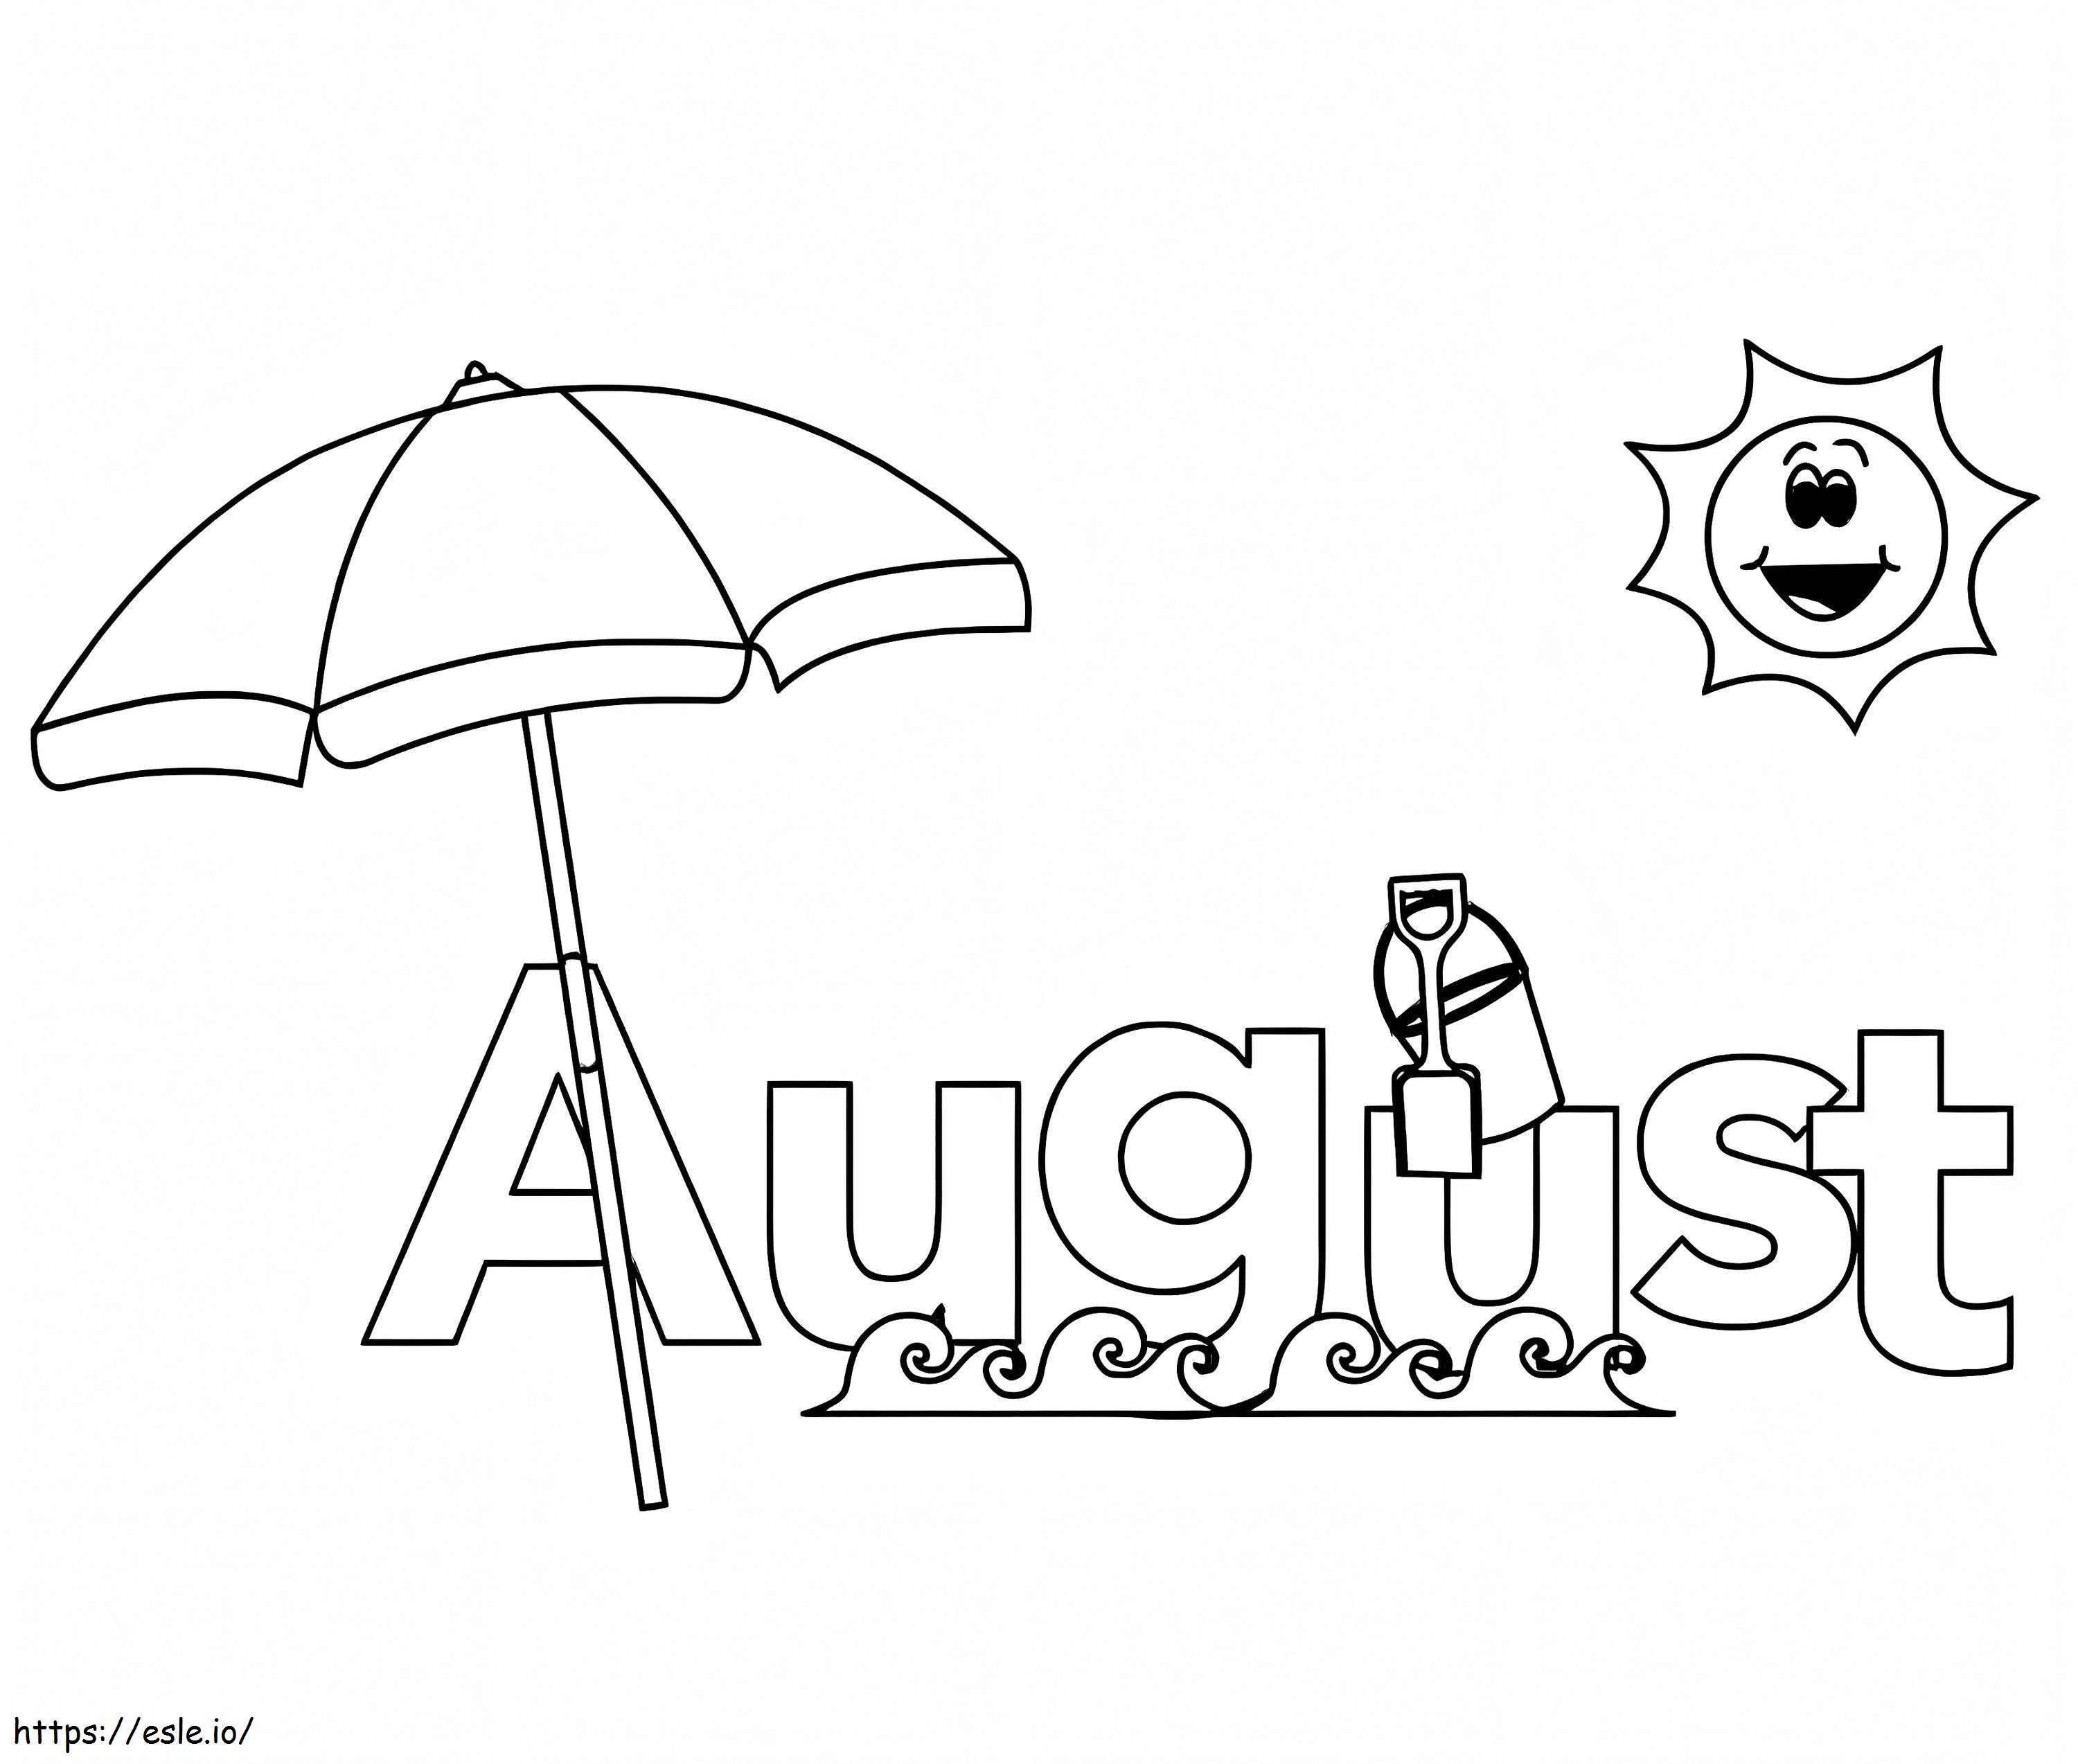 August Beach coloring page